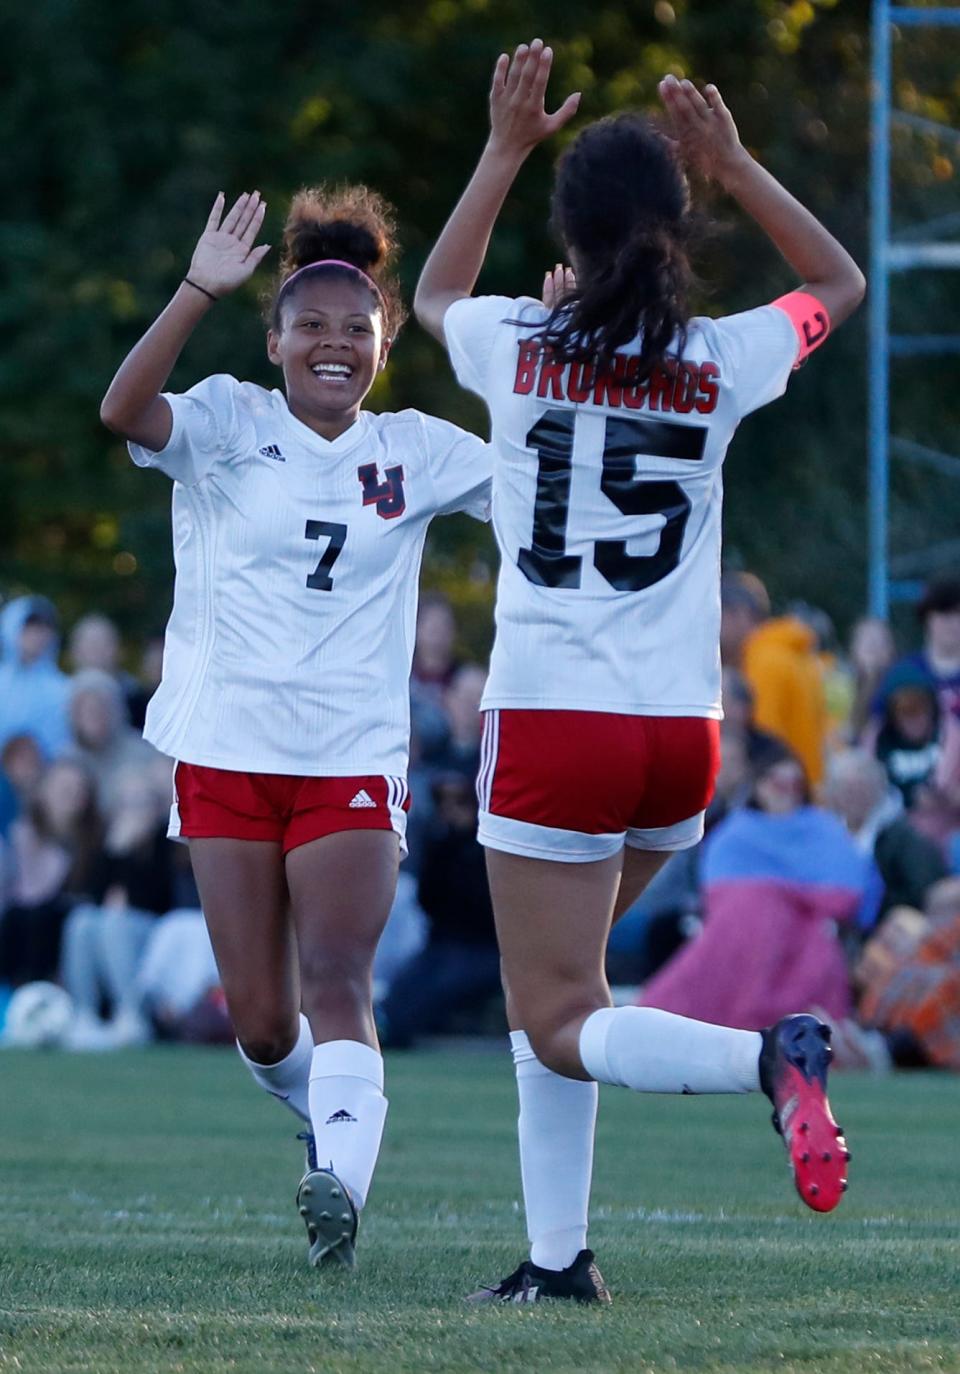 Lafayette Jeff Bronchos celebrate after scoring during the IHSAA girls soccer game against the Faith Christian Eagles, Thursday, Sept. 22, 2022, at Faith Christian High School in Lafayette, Ind.